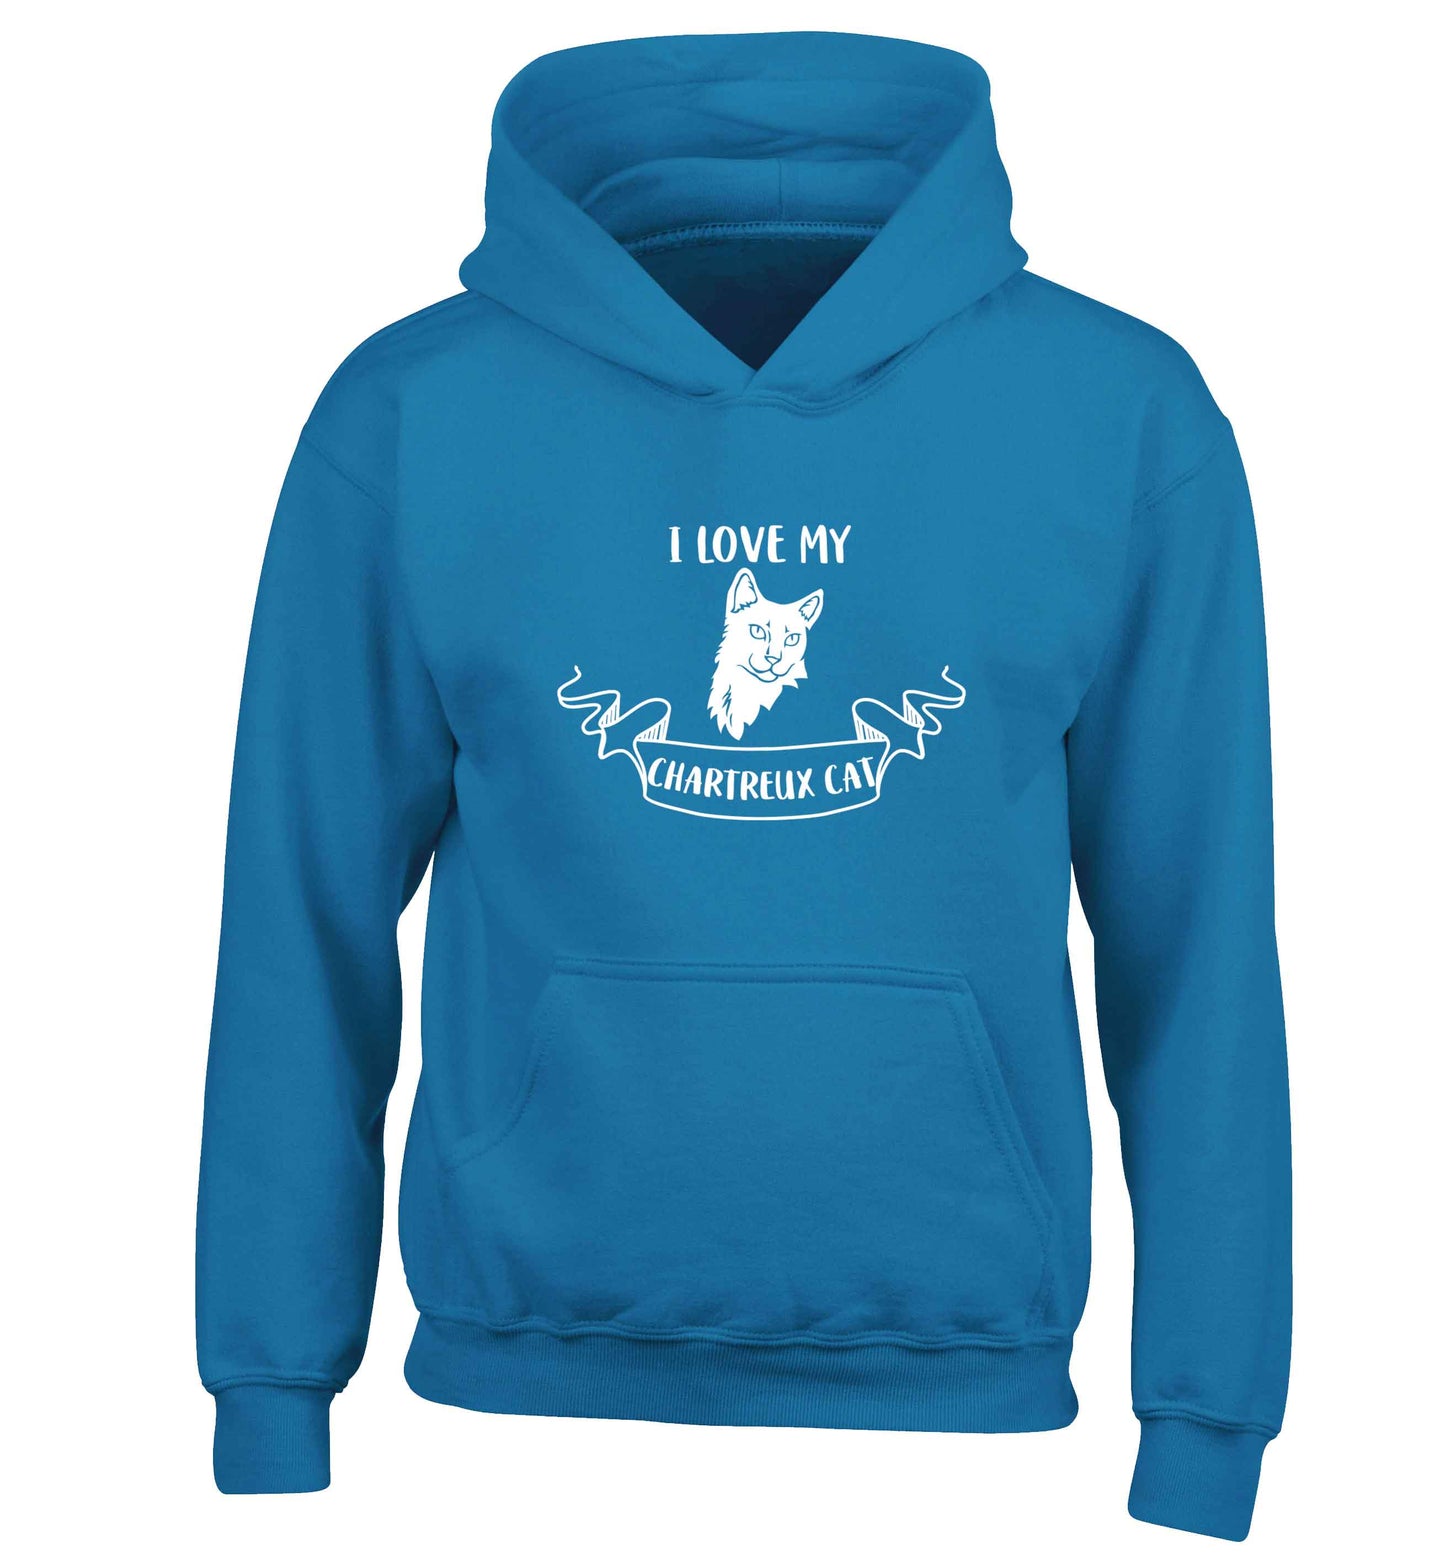 I love my chartreux cat children's blue hoodie 12-13 Years